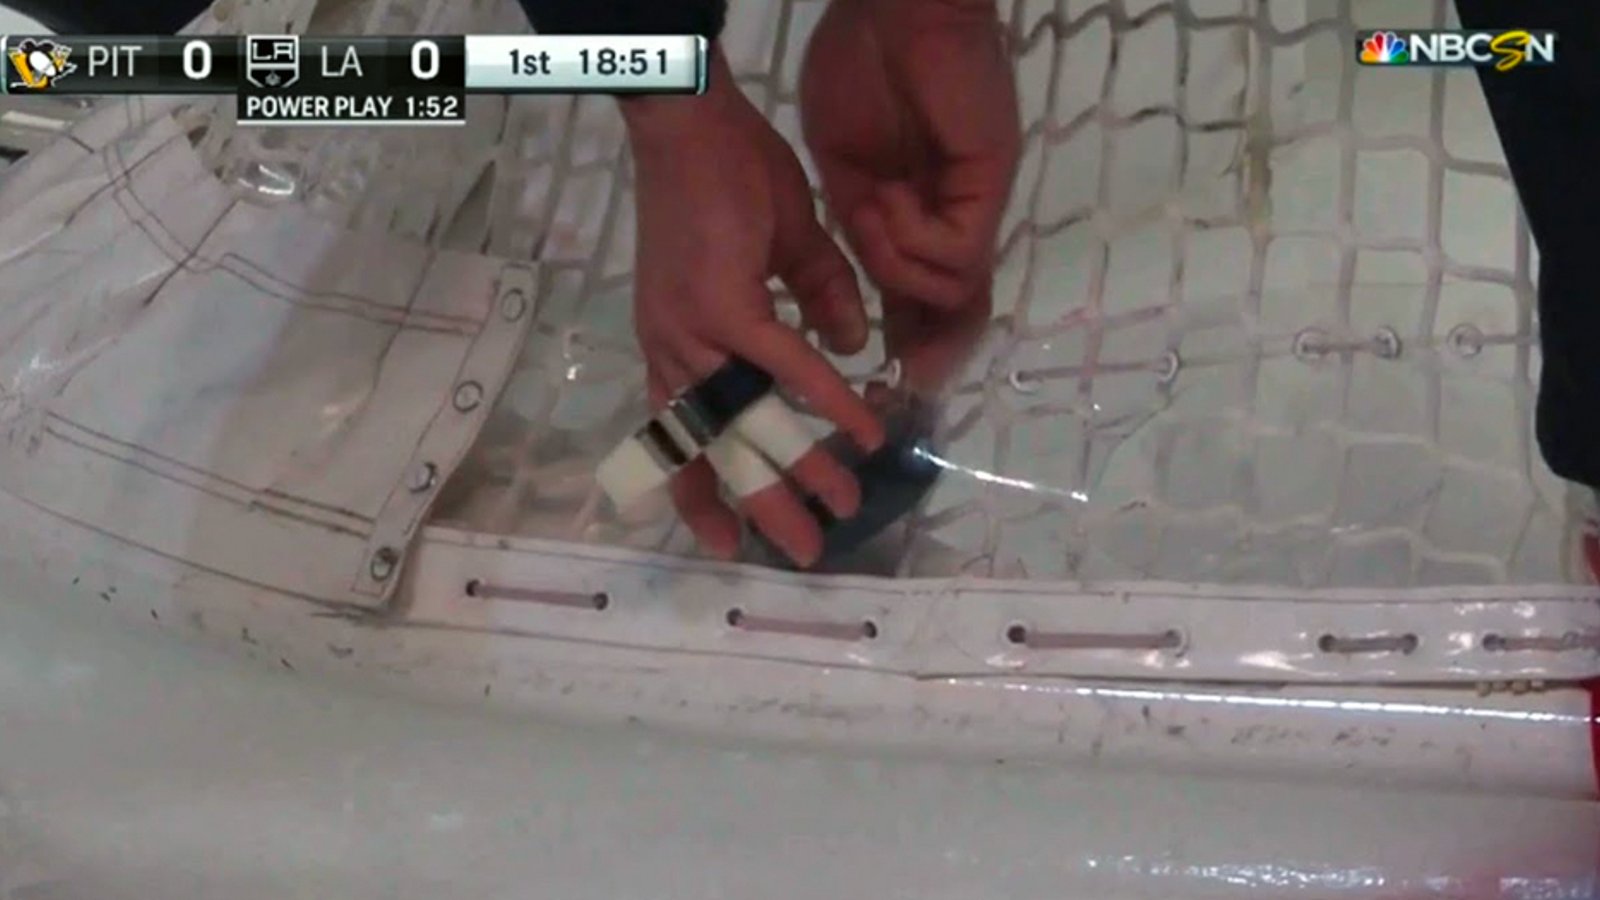 AHL hardest shot champion Frk blasts it so hard that the puck literally gets stuck in the net